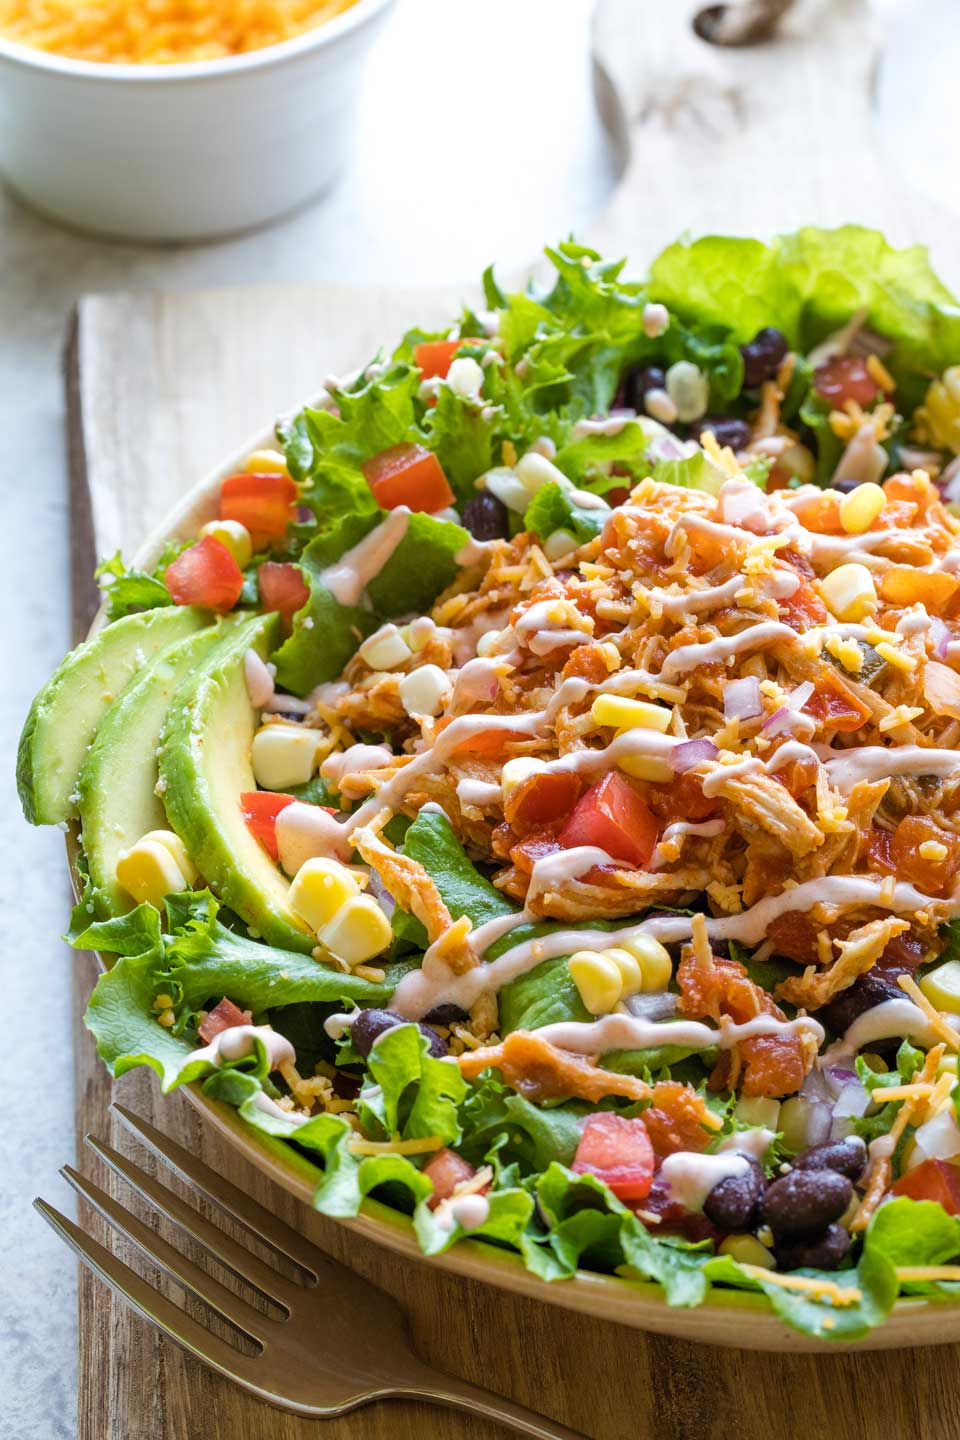 Serving suggestion showing the shredded chicken piled on top of a loaded taco salad.